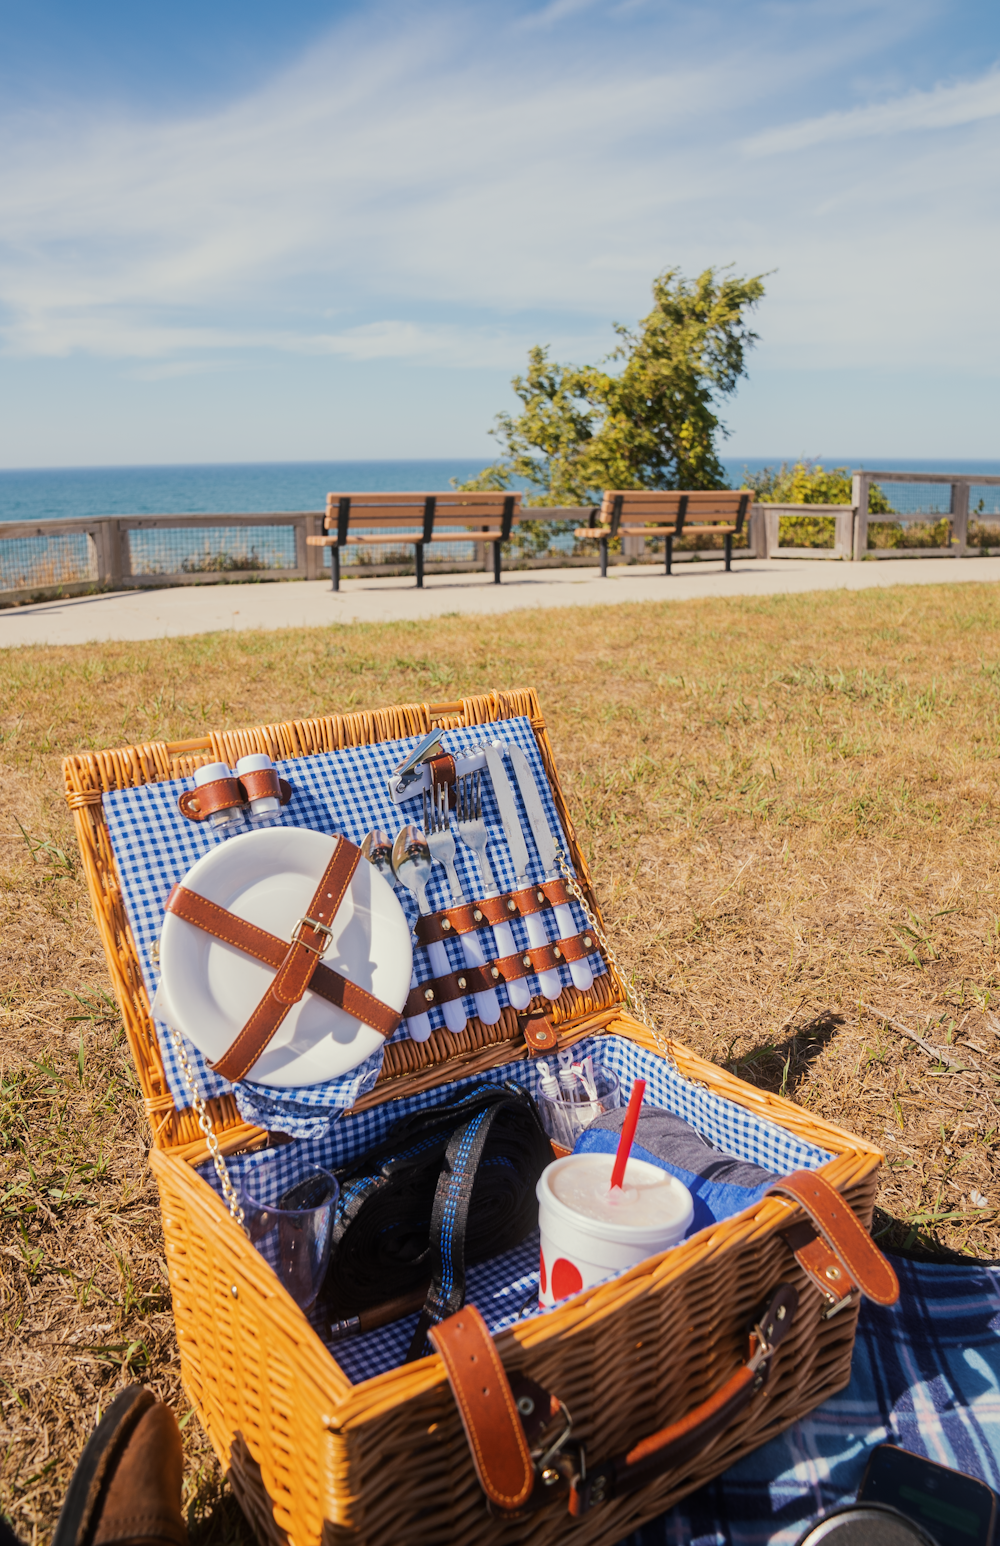 a picnic basket with plates and drinks in it